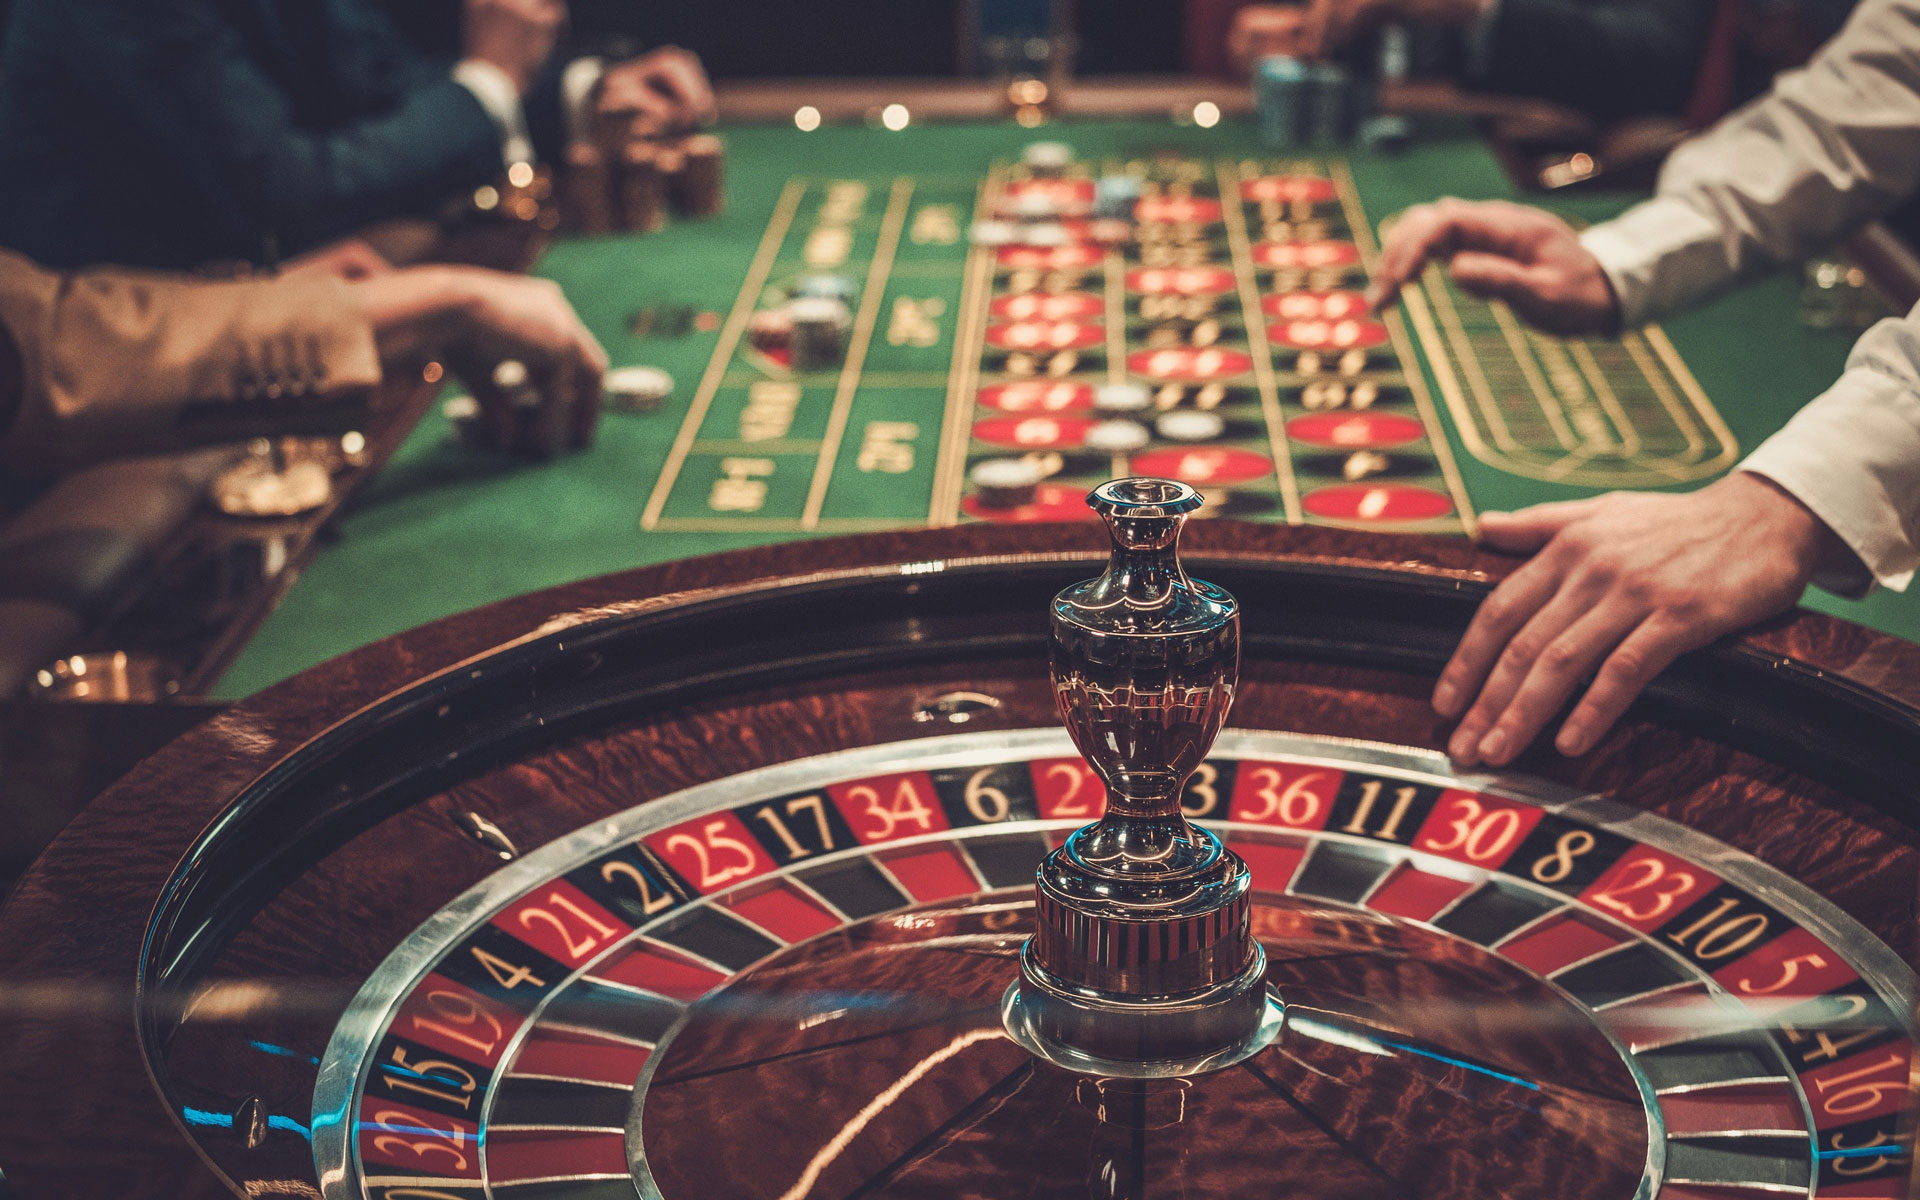 A Simple Plan For online casino Cyprus